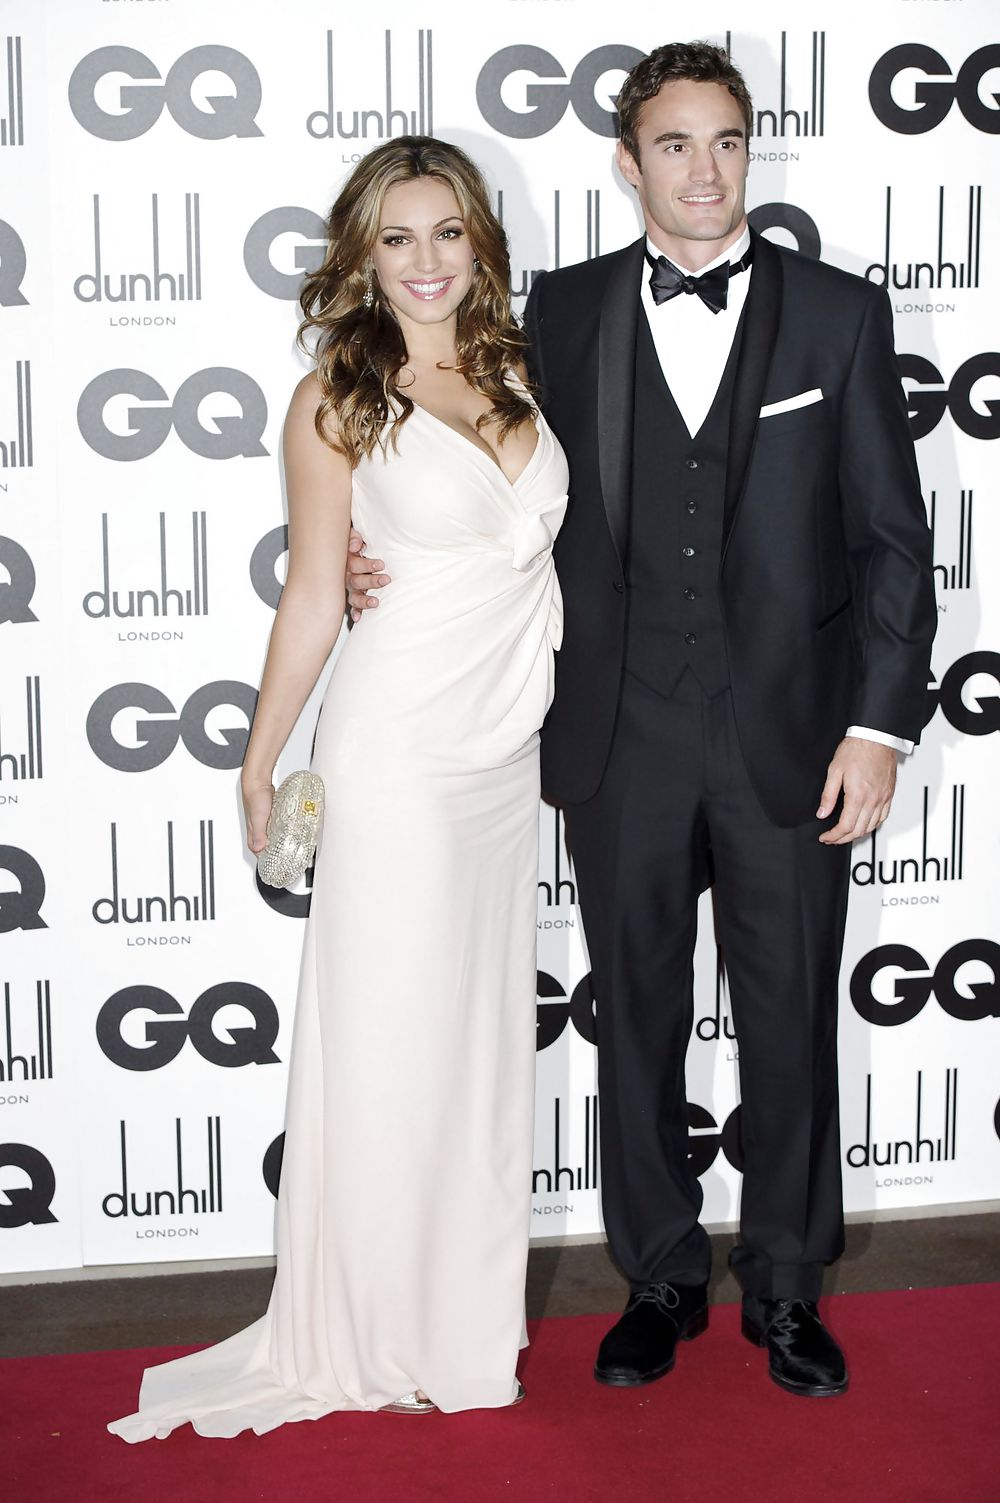 Kelly Brook 2011 GQ Men of the Year Awards in London #7536389